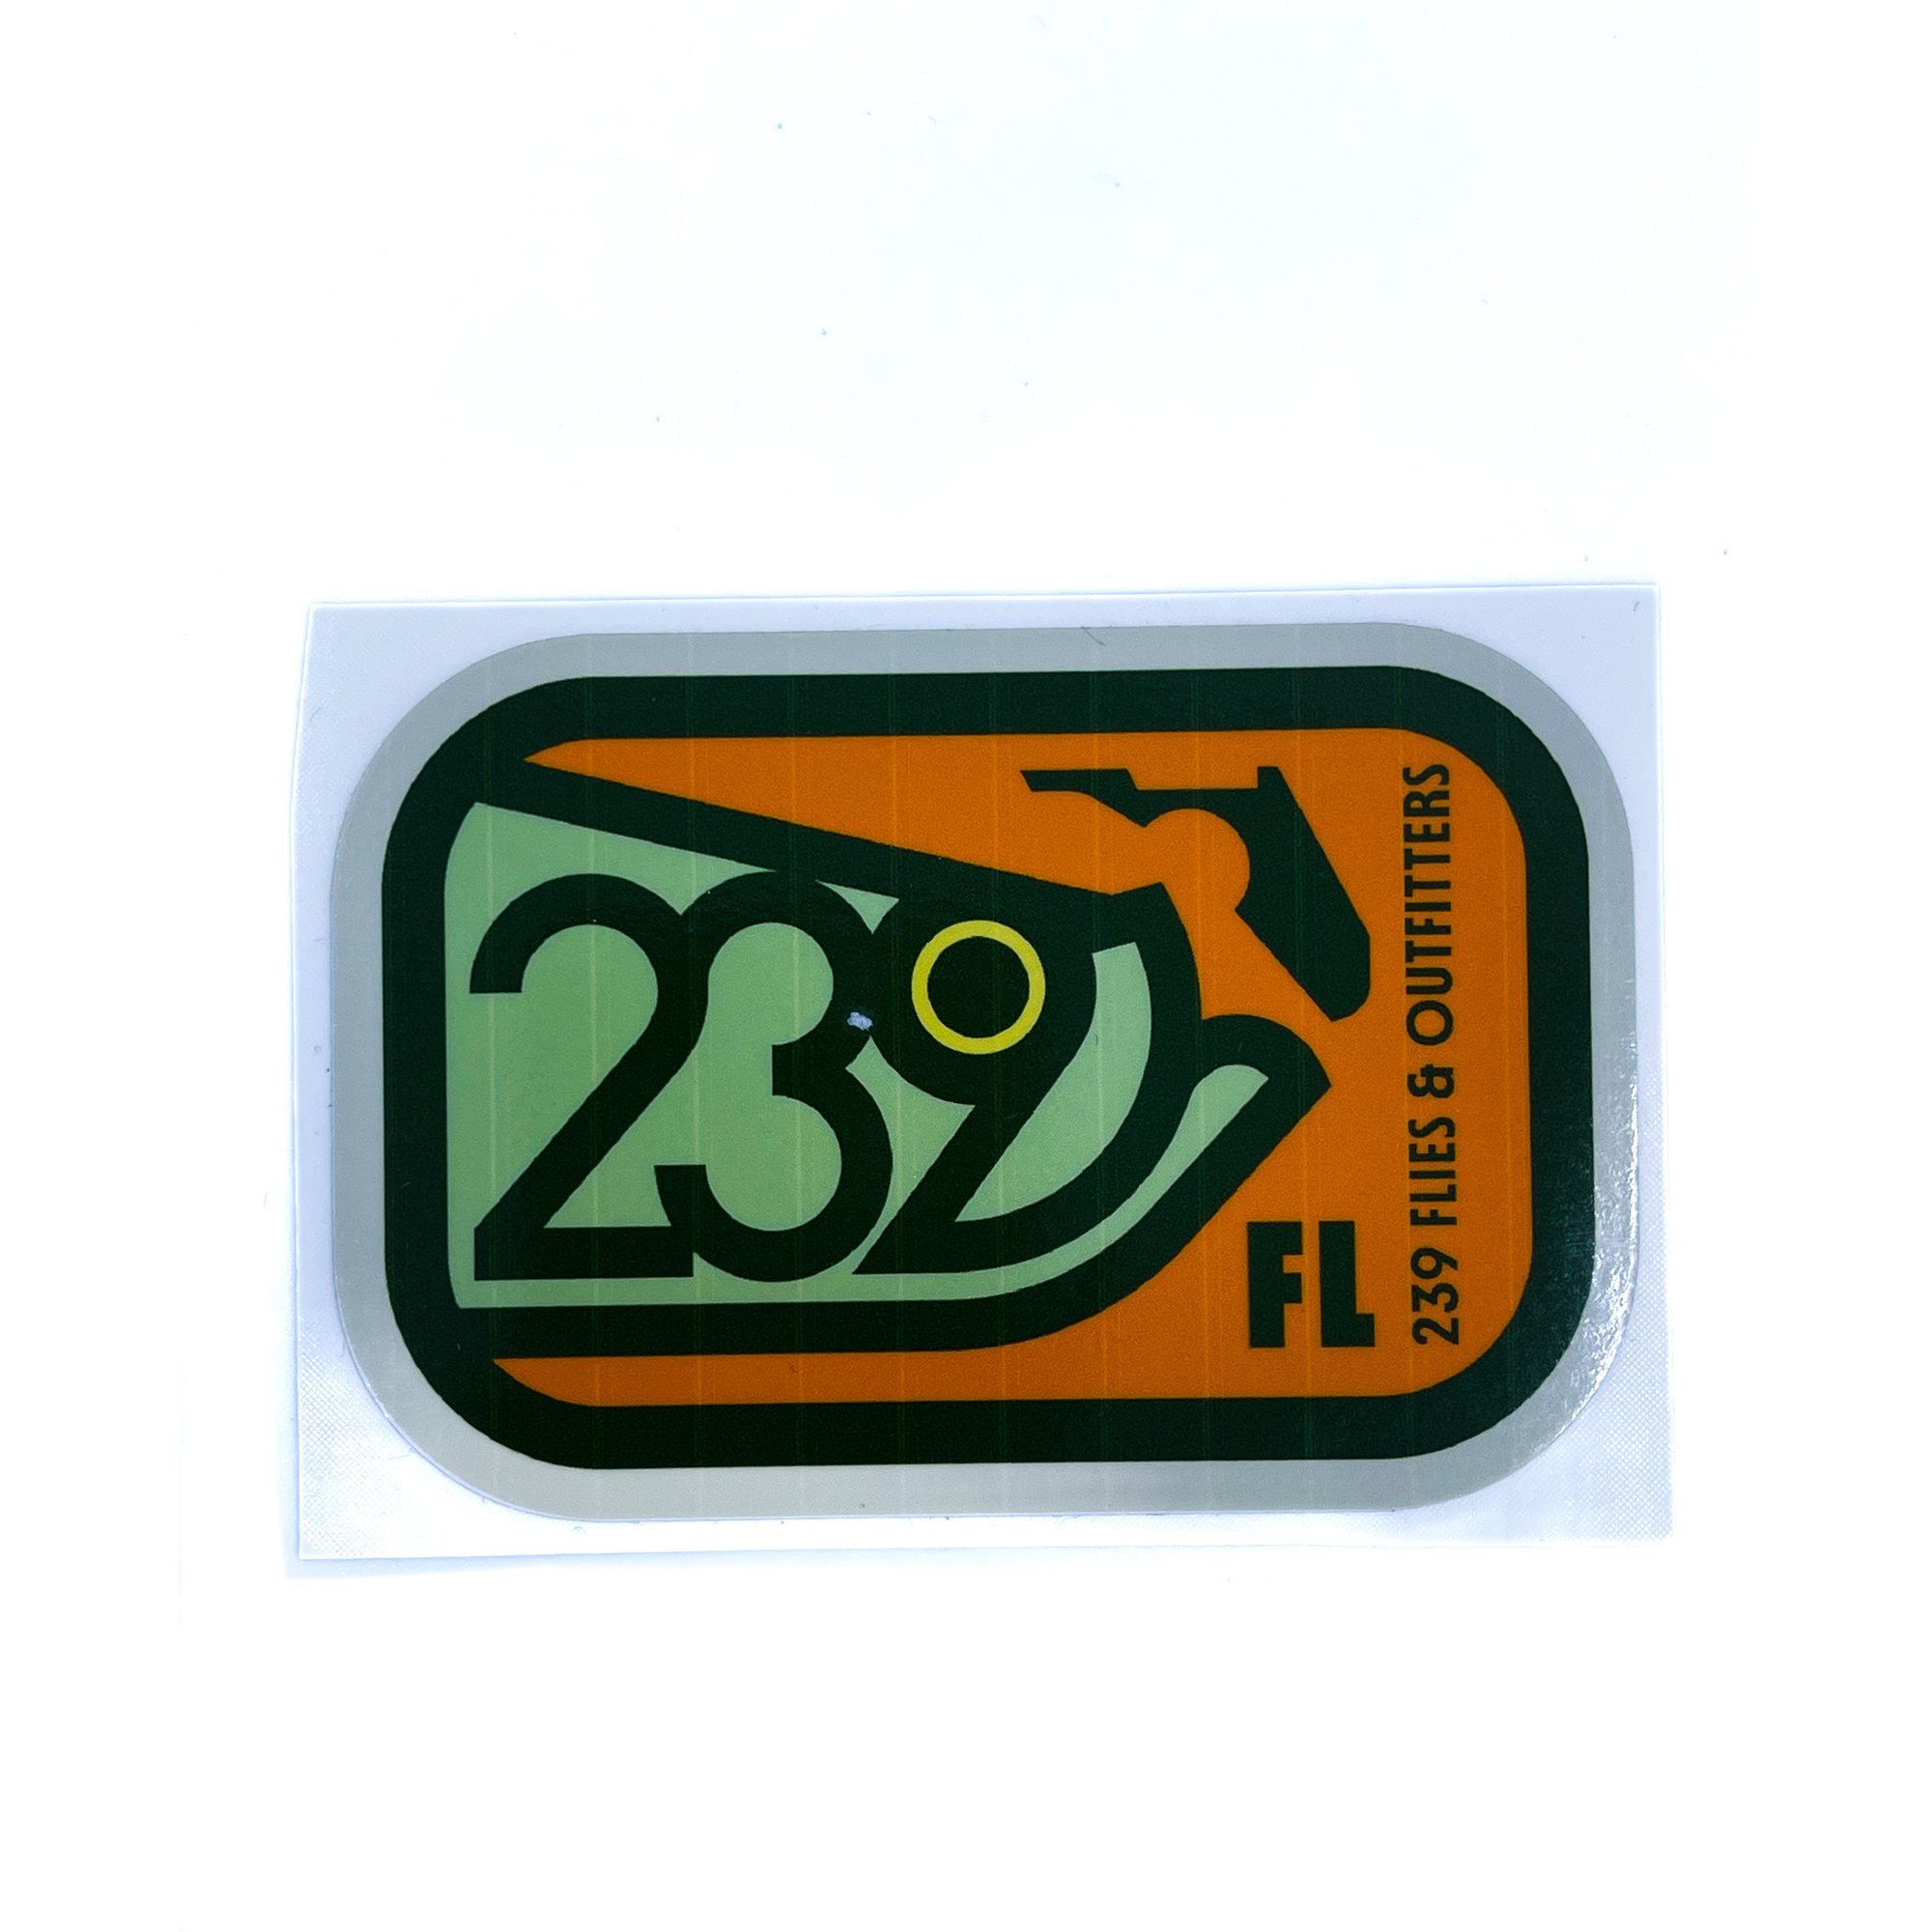 239 Tarpon (Is that a niner in there?) Sticker